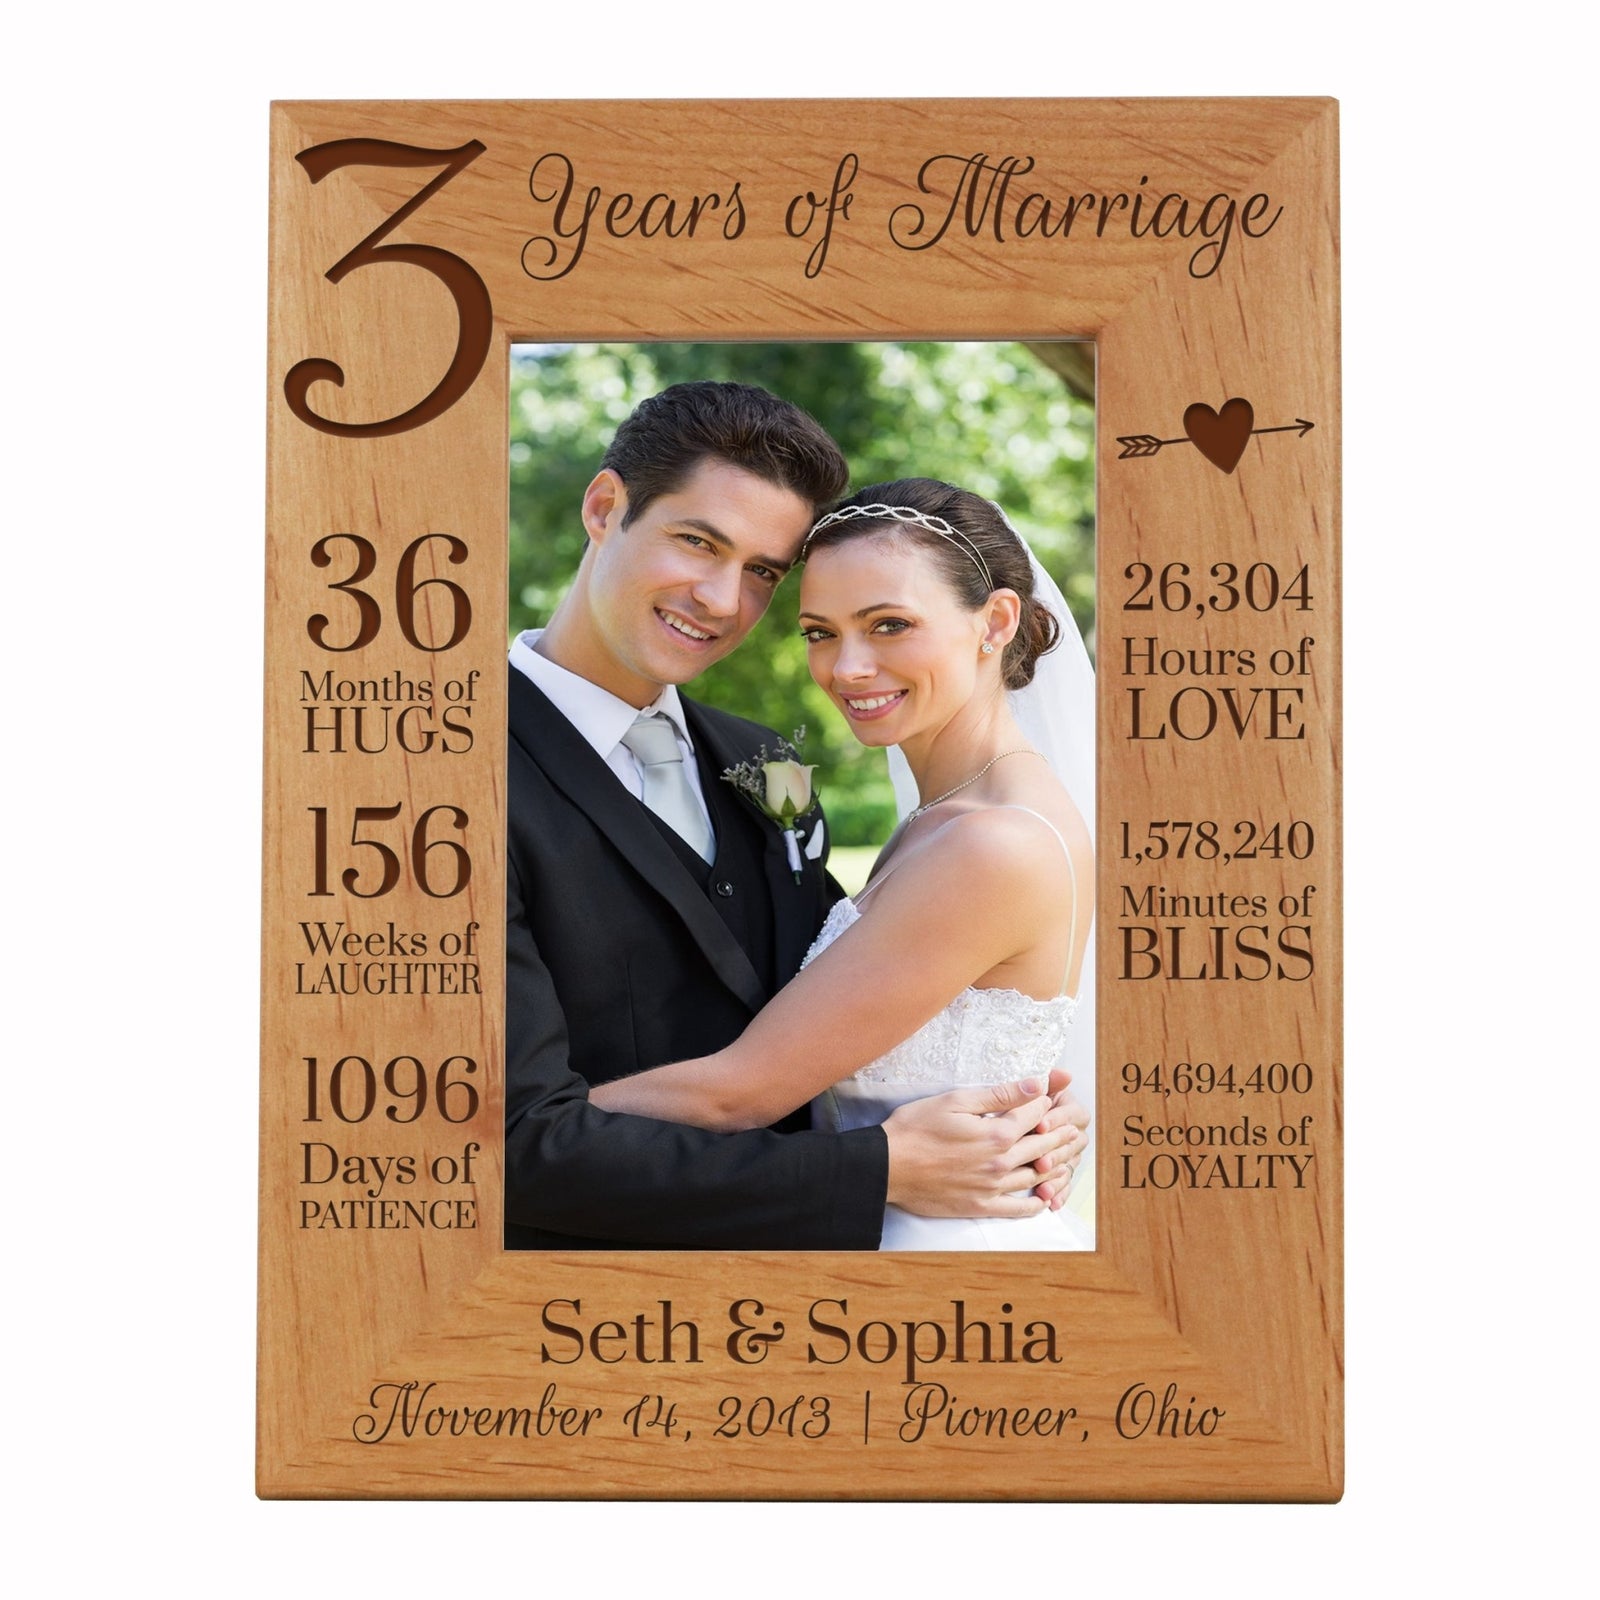 Engraved Personalized 3rd Anniversary Photo Frame - 6.5" x 8.5" - LifeSong Milestones